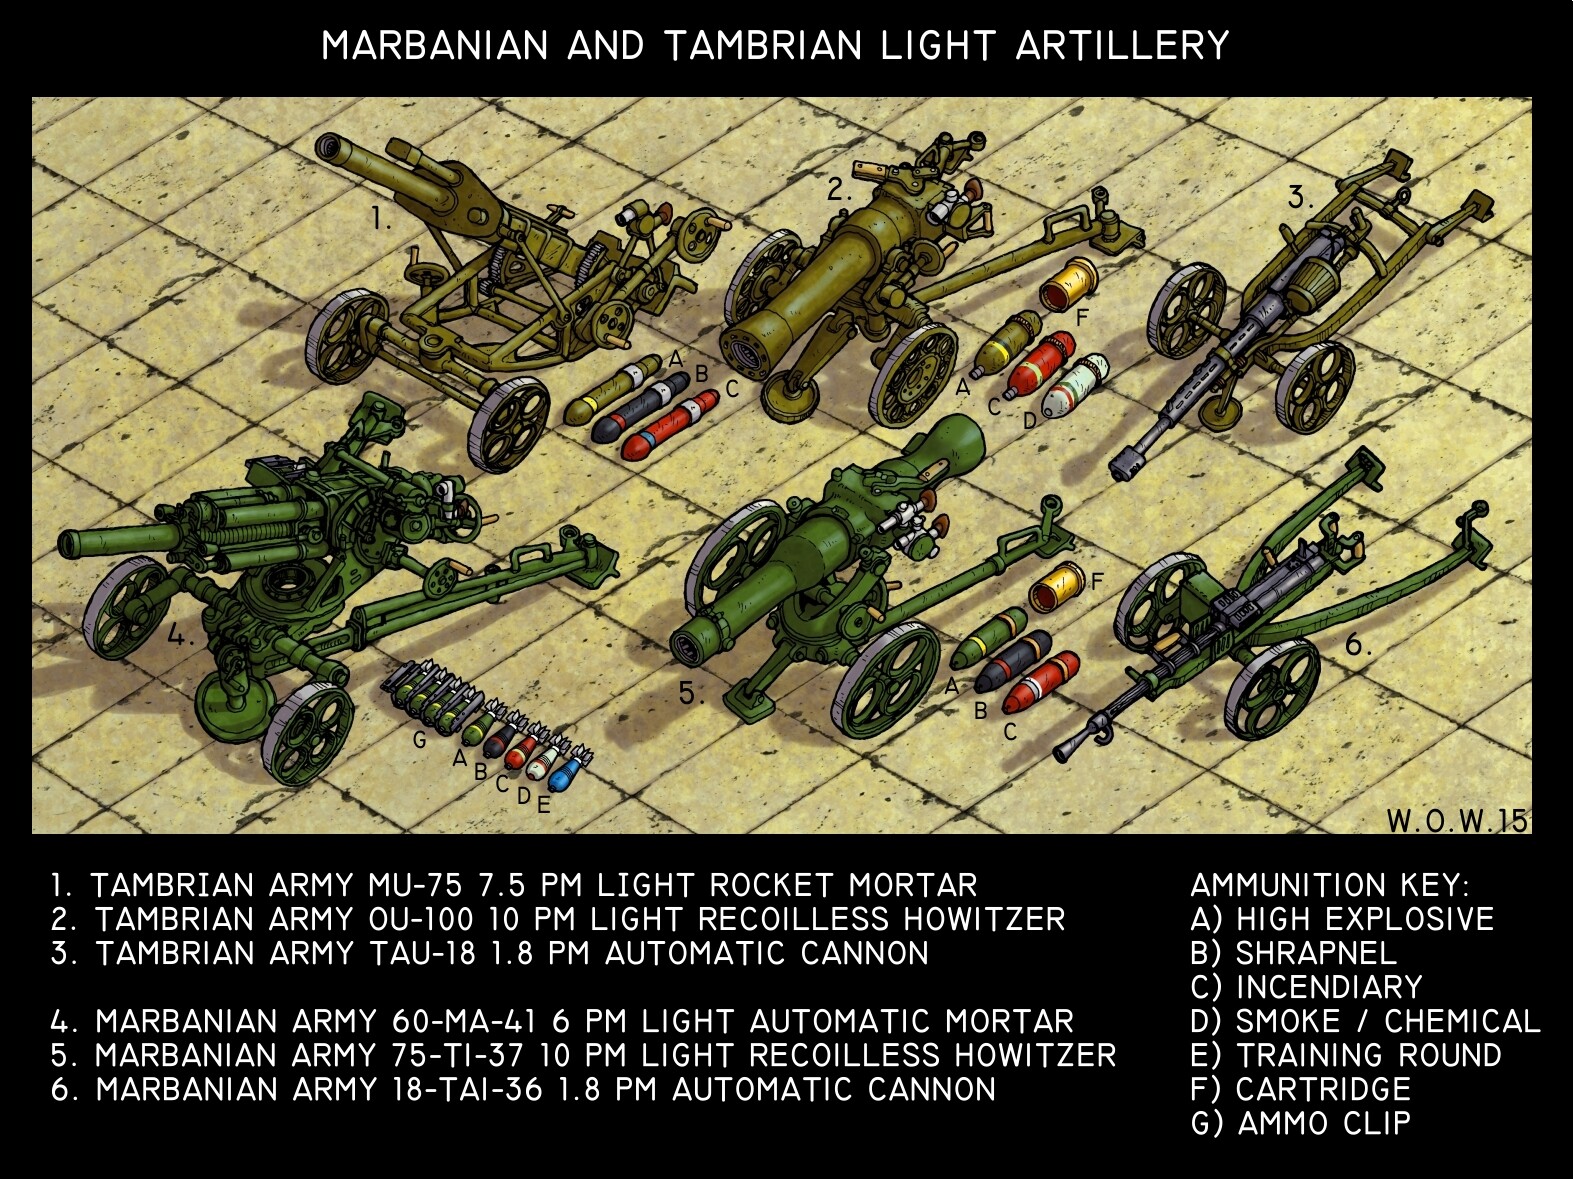 Marbaina and Tambrian light artillery, from light automatic guns to mortars.  These are light, close-support weapons used by infantry units at battalion level to bolster their firepower, as opposed to being found in dedicated artillery regiments.